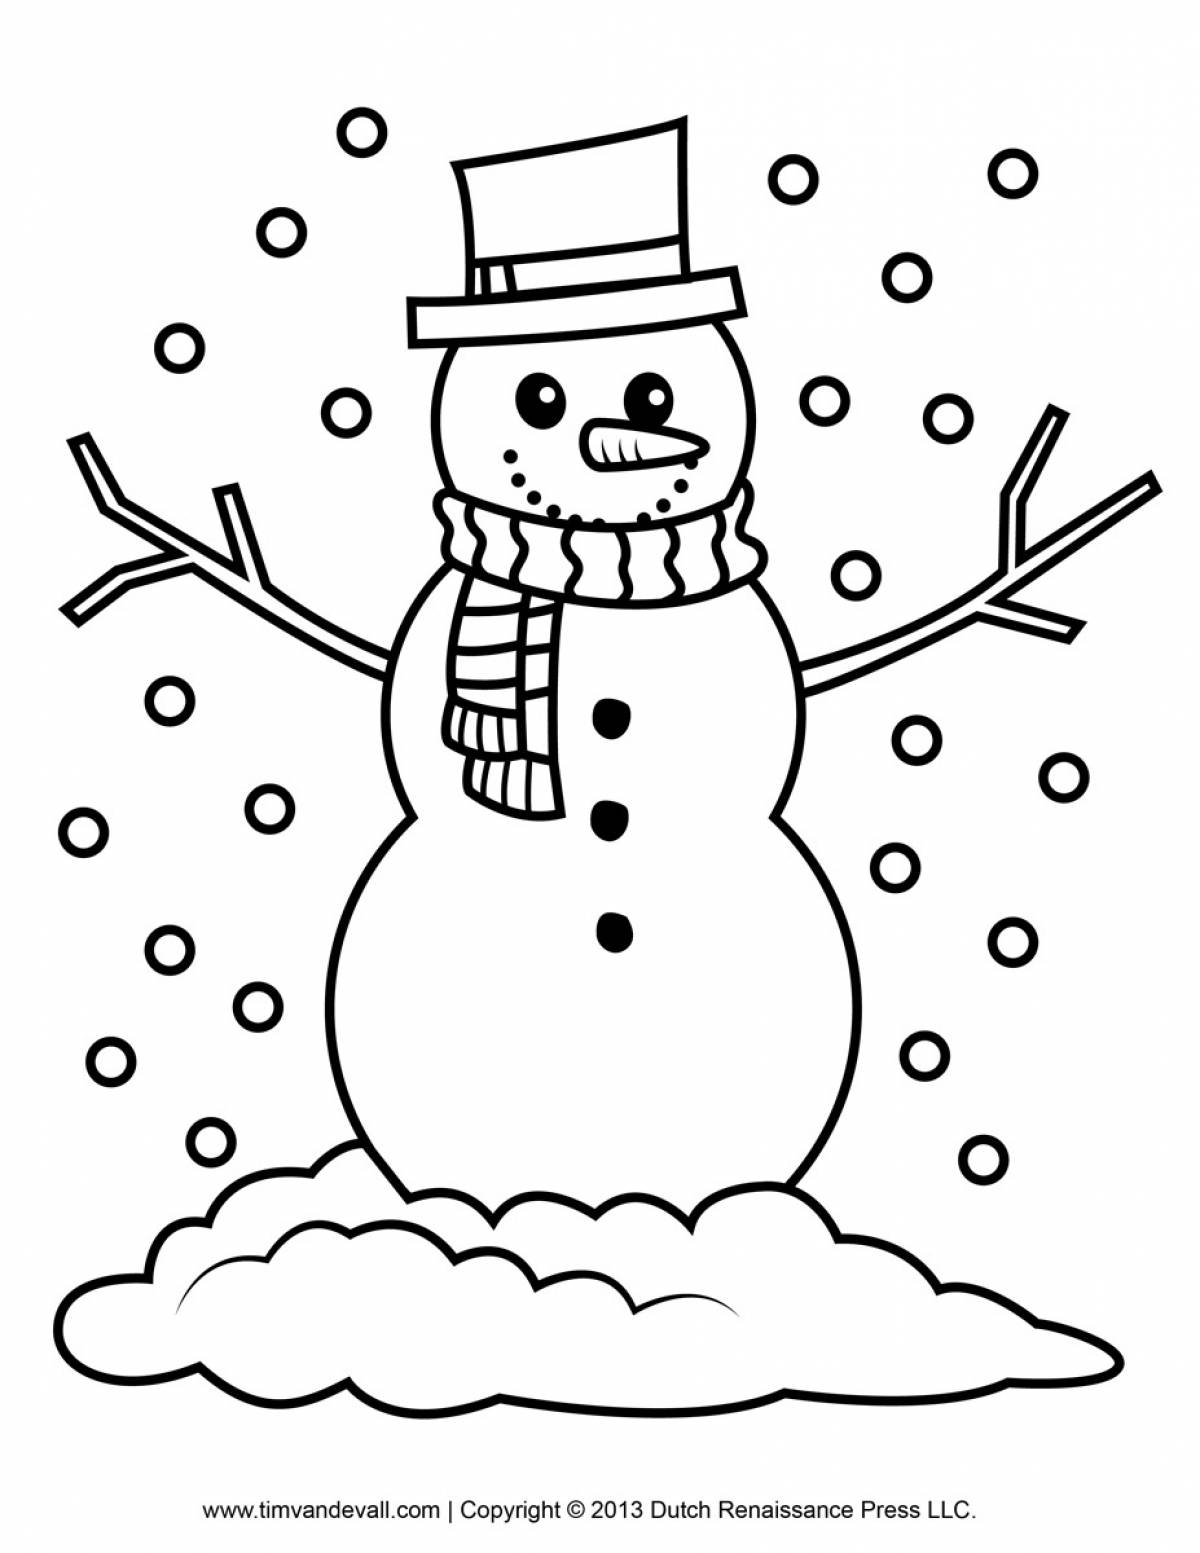 Smart snowman coloring for kids 5 6